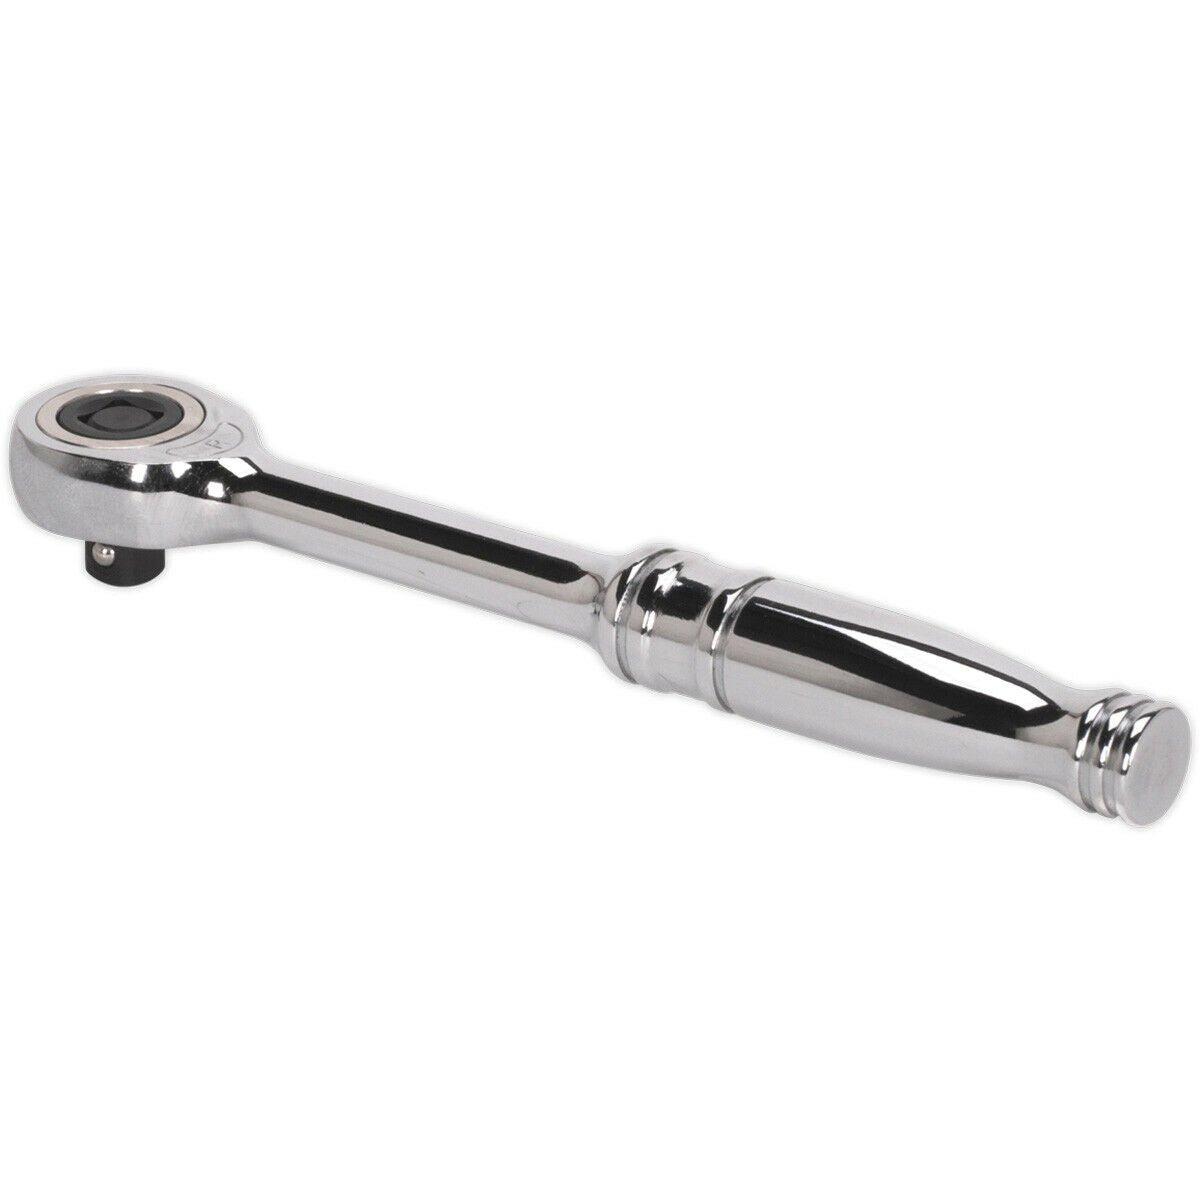 Gearless Ratchet Wrench - 1/4 Inch Sq Drive - Push-Through Reverse Steel Wrench